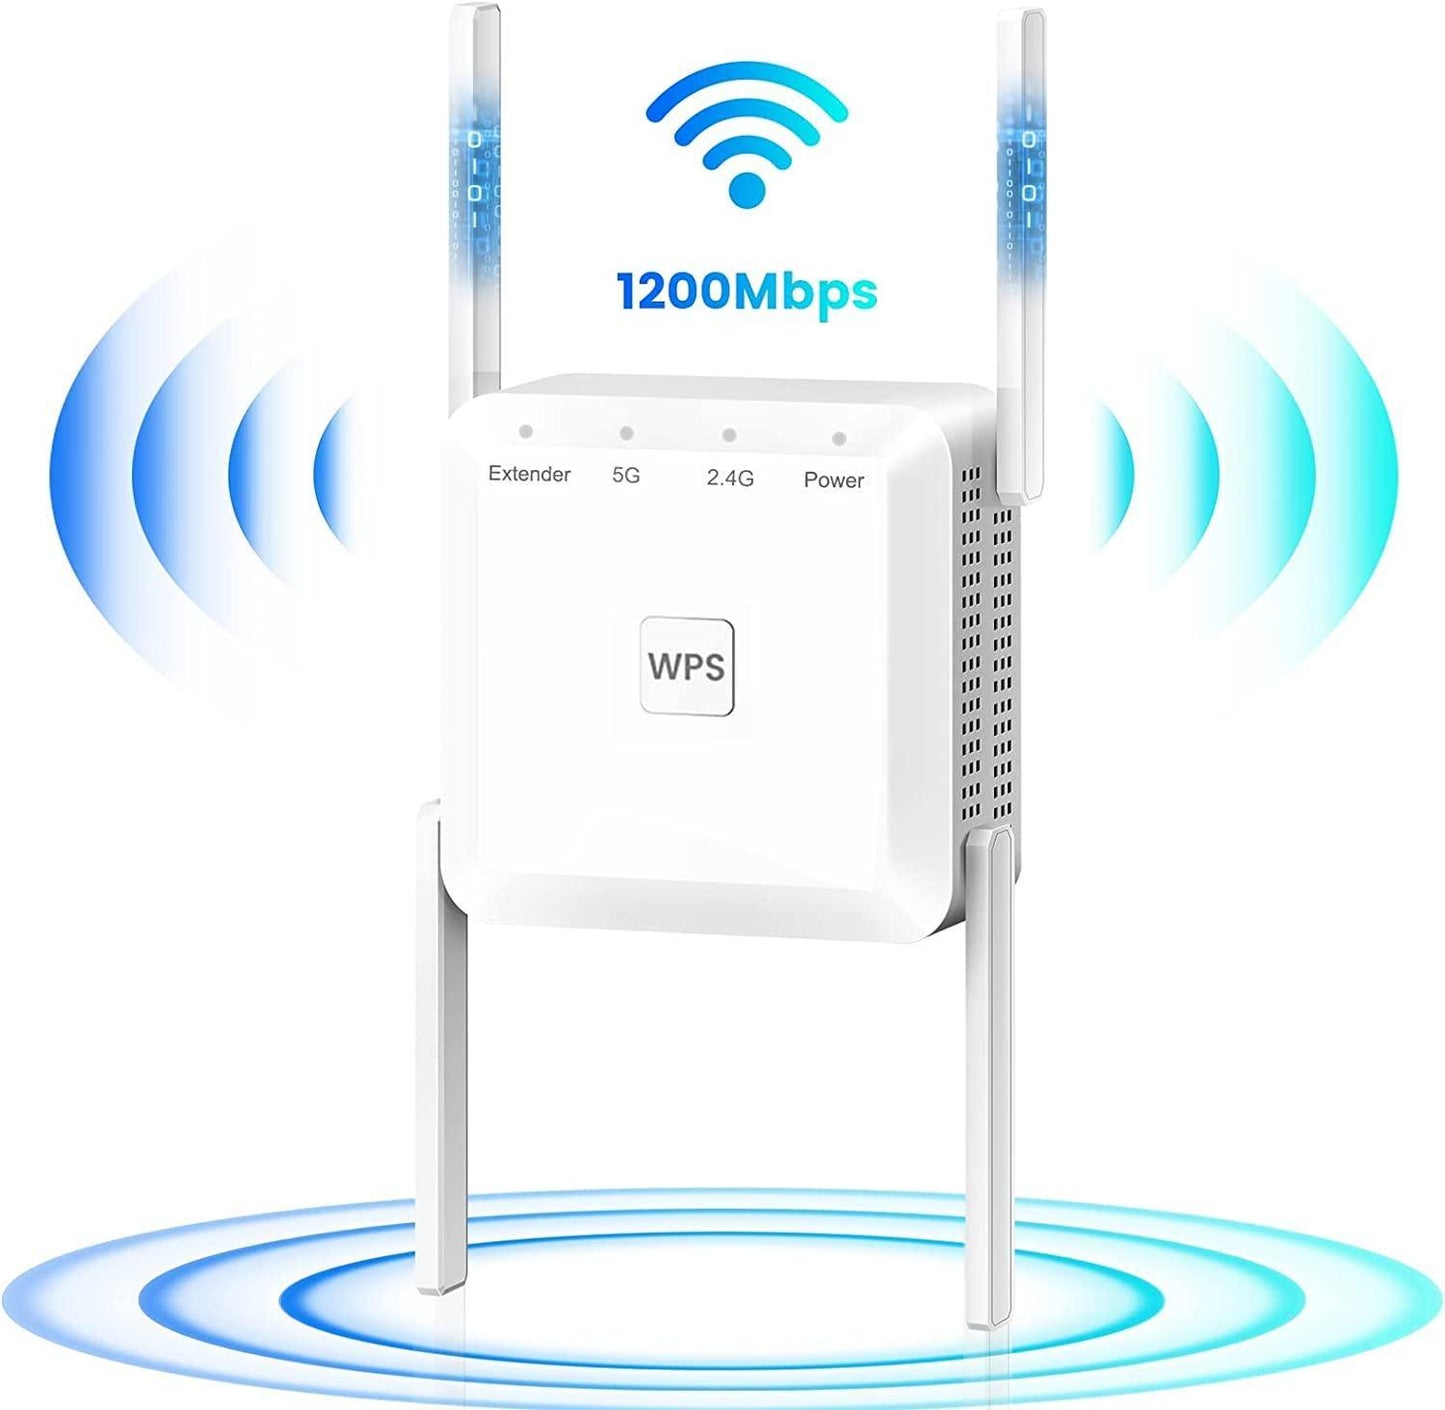 WiFi Extender - 5G WiFi Repeater Internet Booster with Ethernet Port - 1200Mbps WPS WiFi Extenders Signal Booster for Home - Covers 4000sq.ft 35 Devices